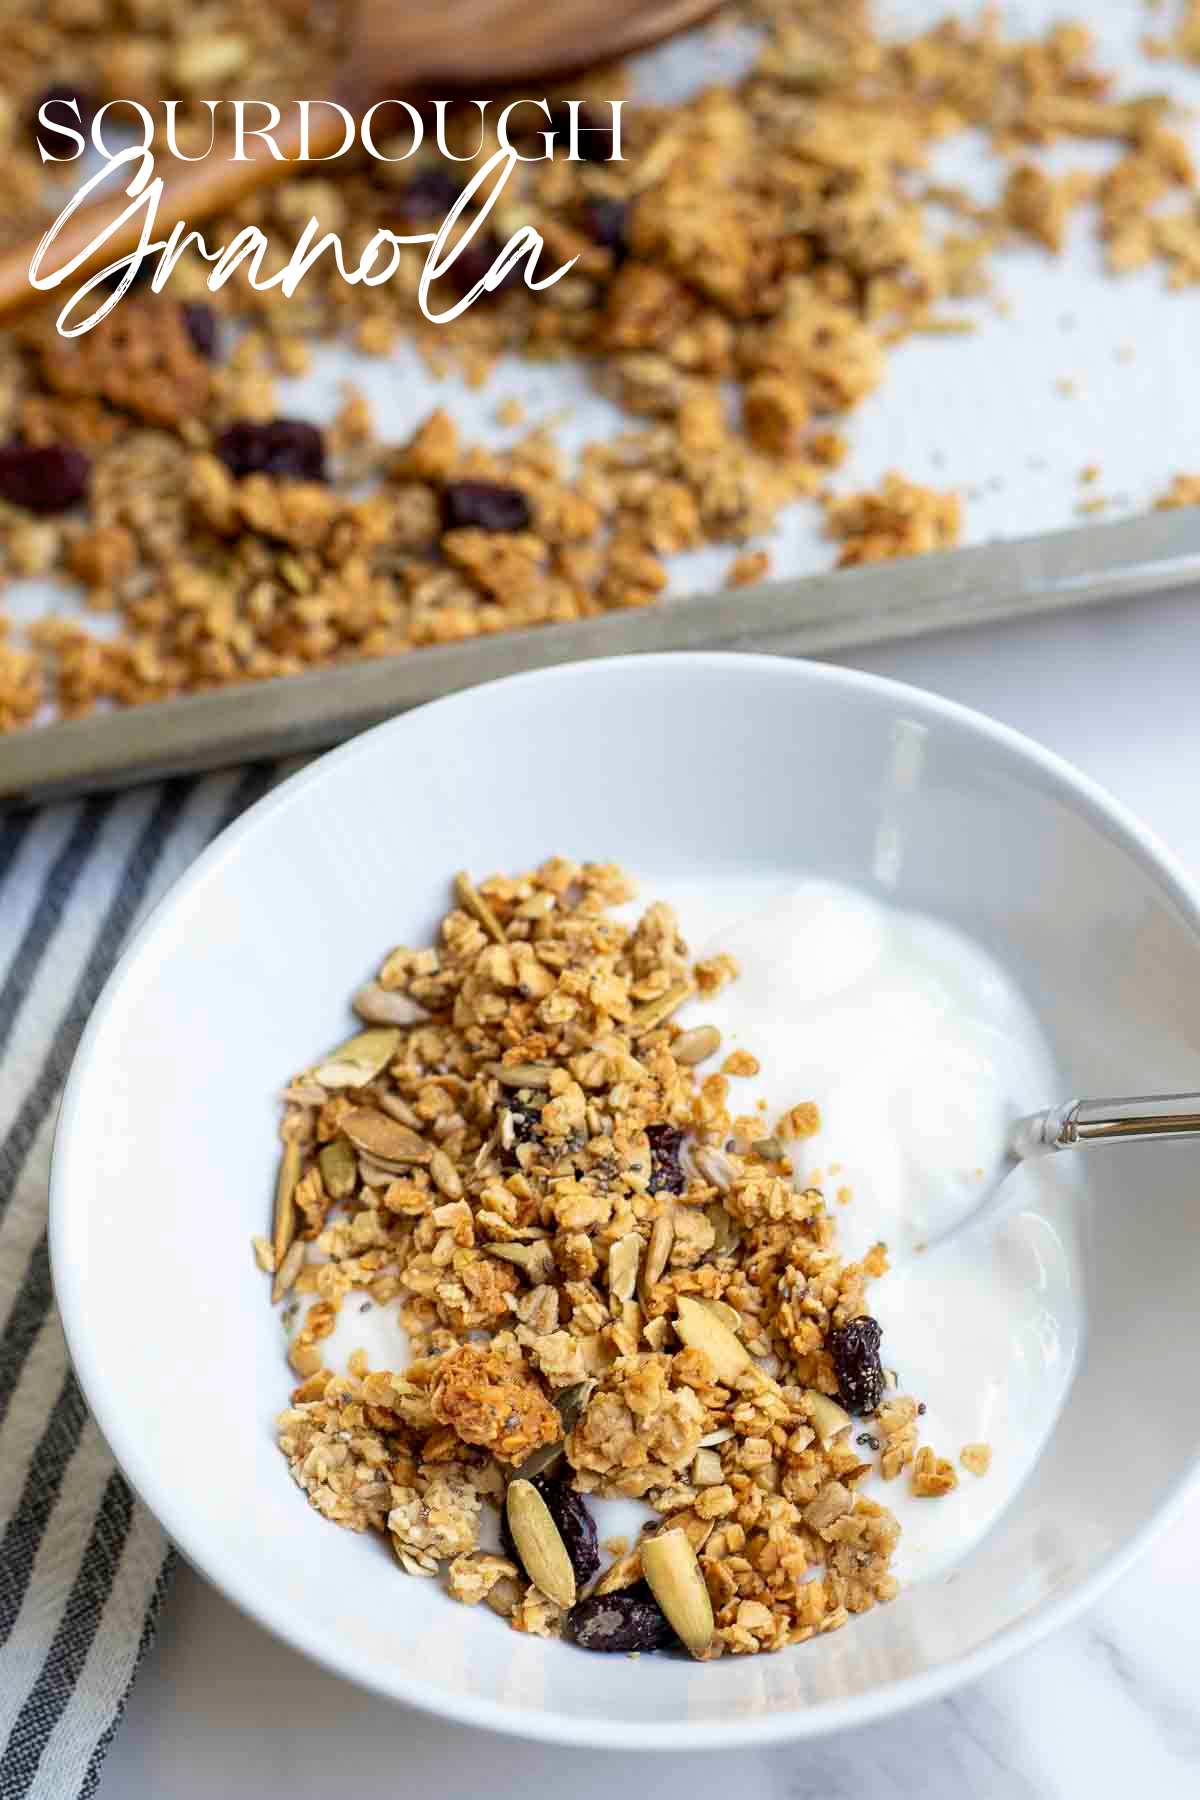 A white bowl of yogurt topped with sourdough granola. A baking sheet of more granola is in the background.